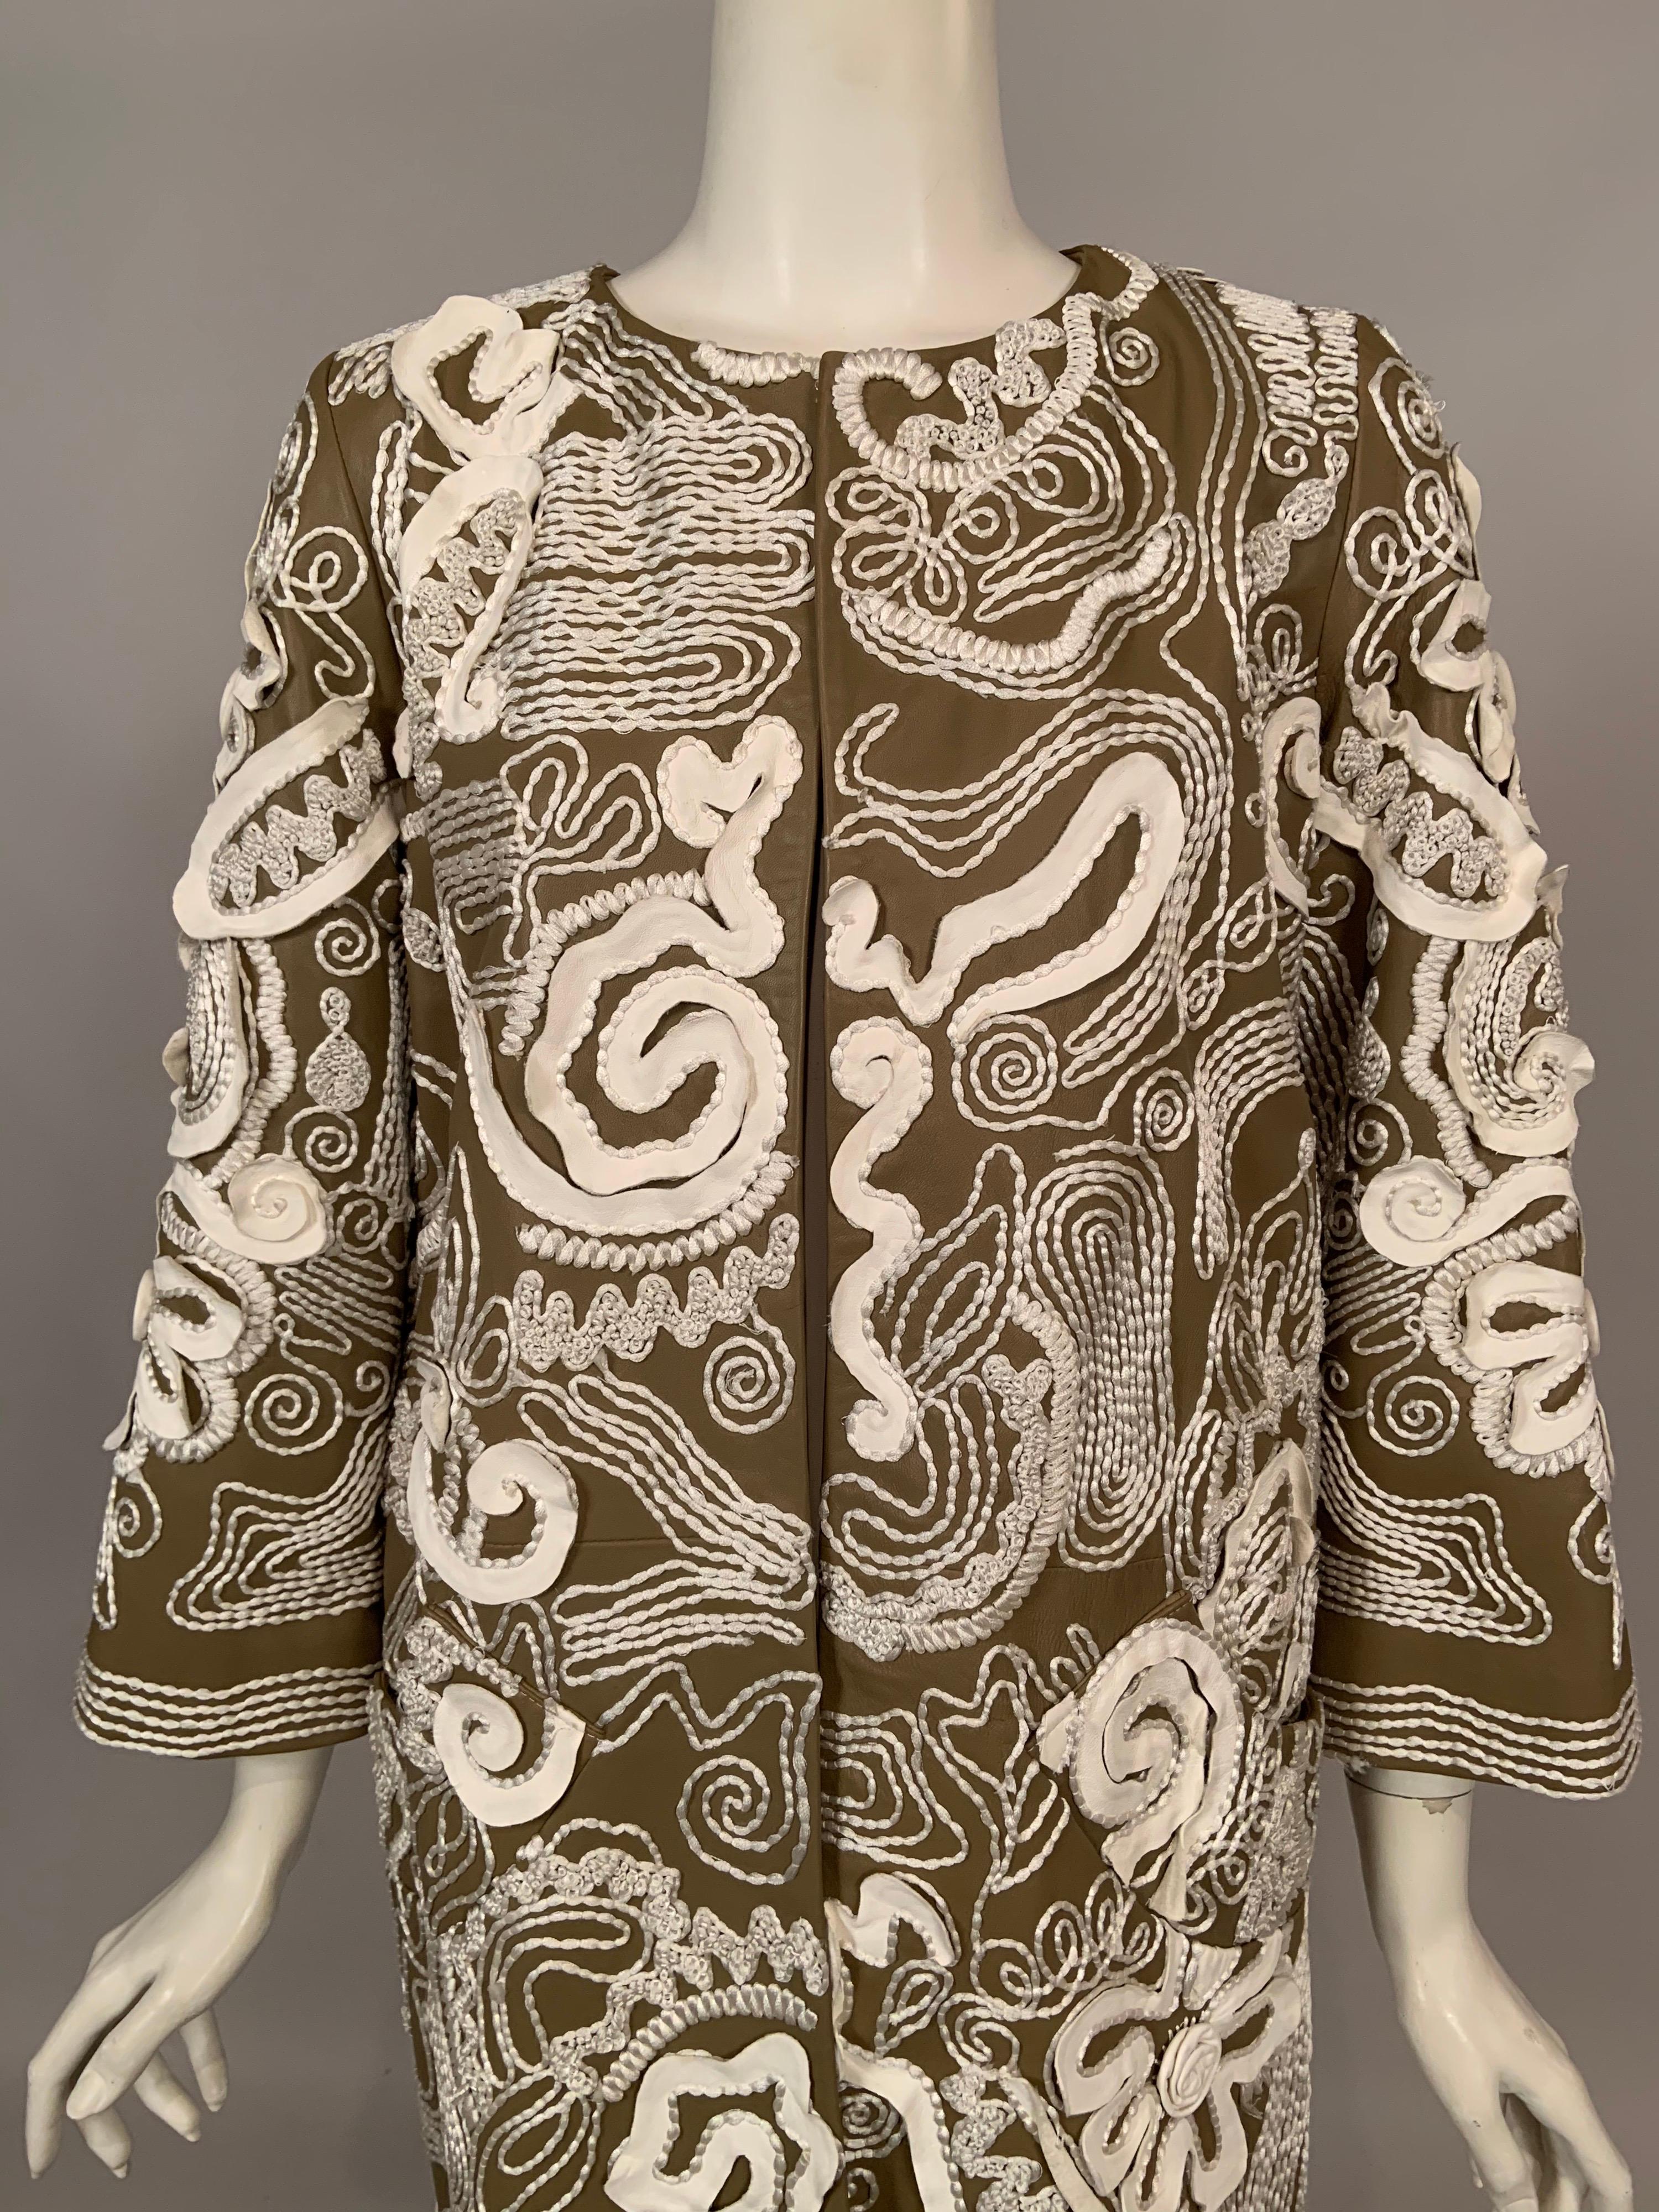 Undulating strips of white leather combined with fanciful hand embroidered white silk threads create a striking and whimsical surface design for this khaki colored lambskin leather coat designed by Oscar de la Renta. The design of the coat is spare